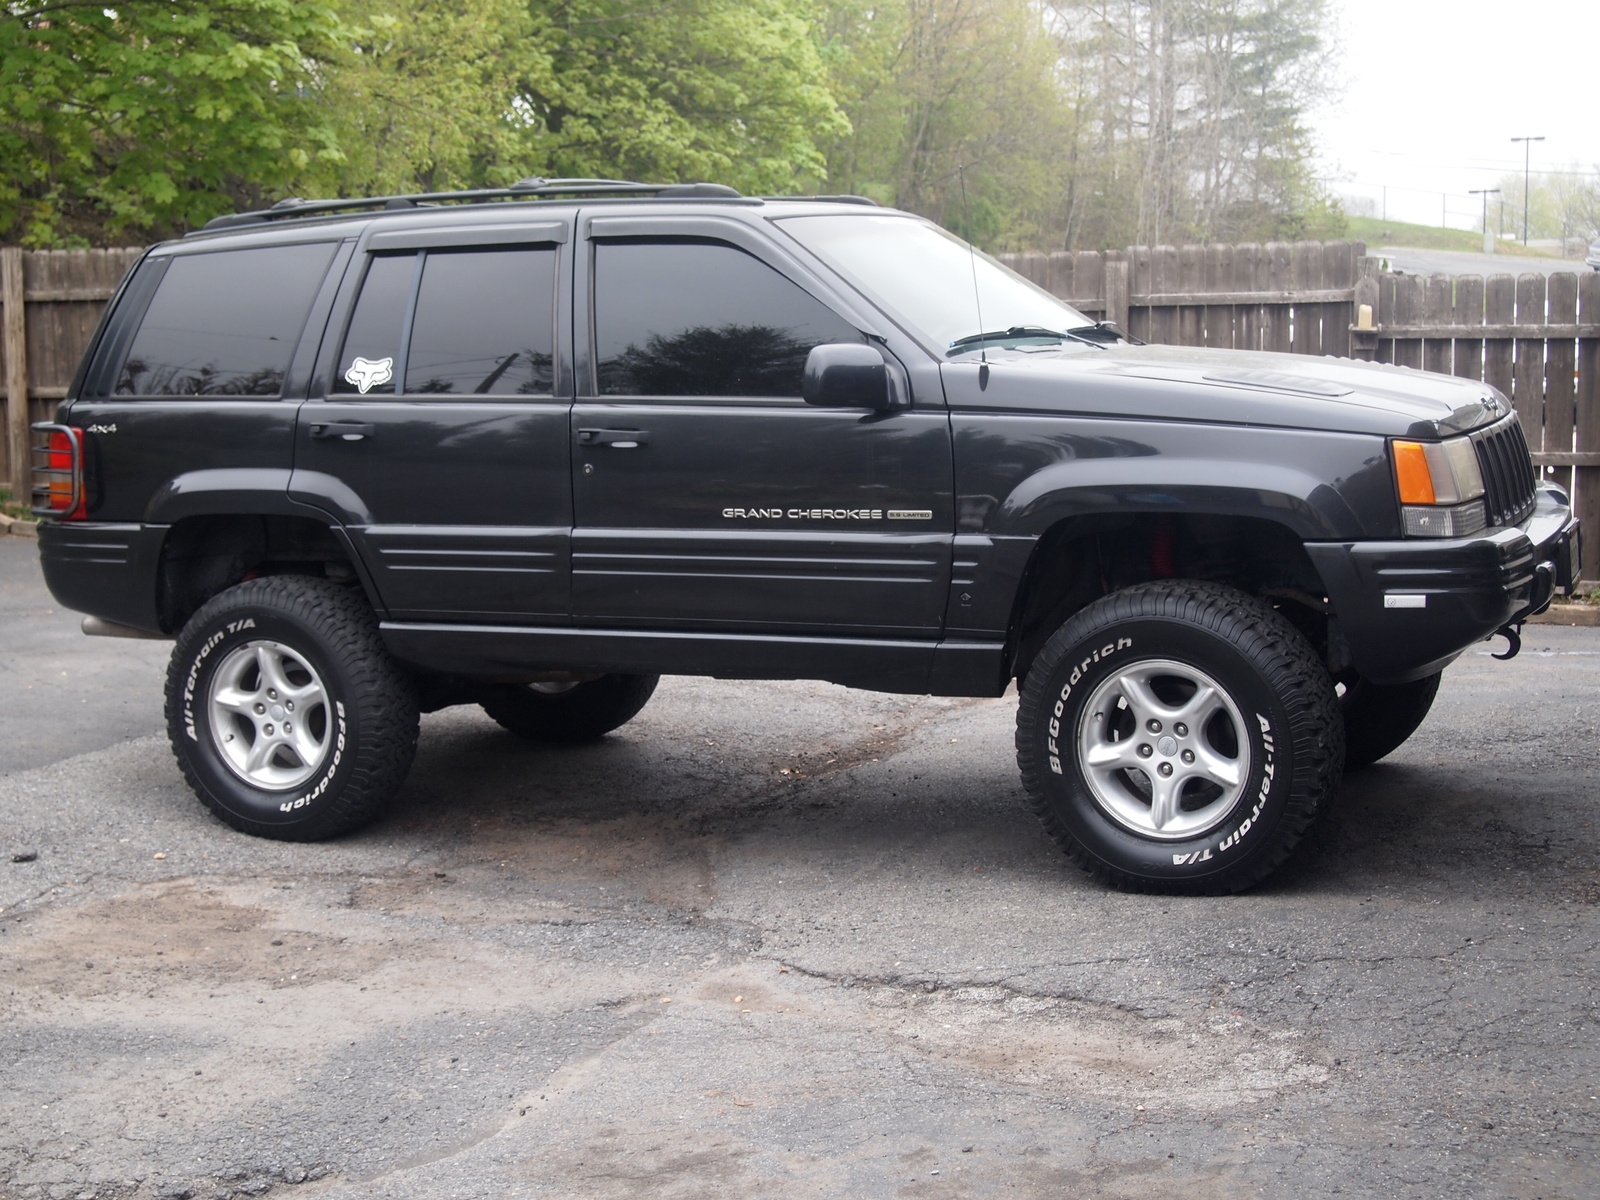 1998 Jeep grand cherokee 5.9 limited problems #2